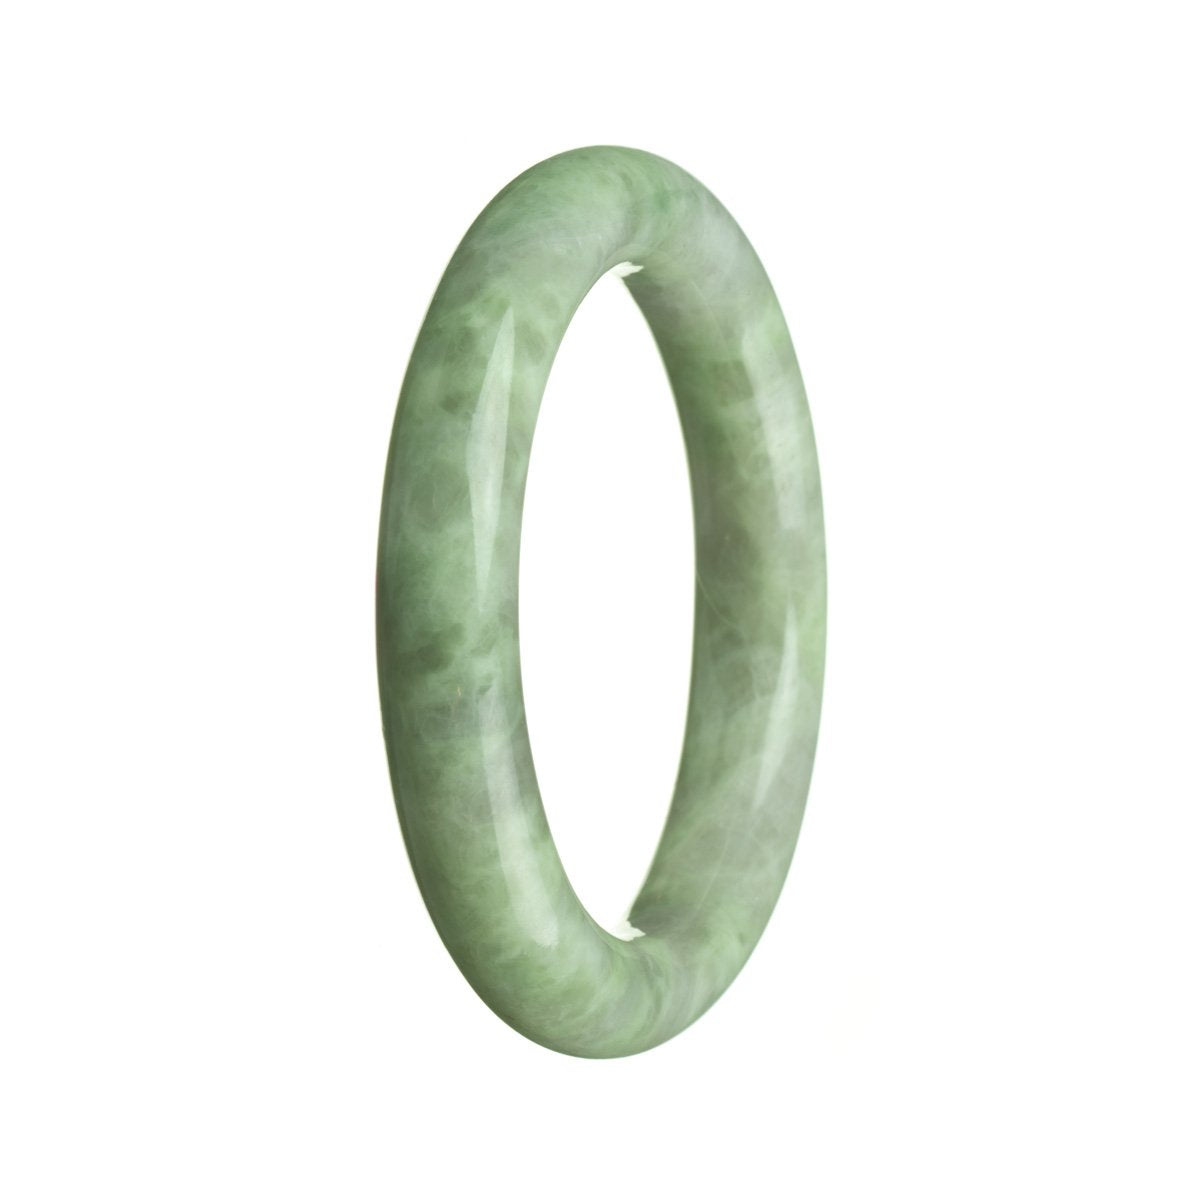 A round green jadeite bracelet with a 55mm diameter, known for its high quality and authenticity. Created by MAYS™.